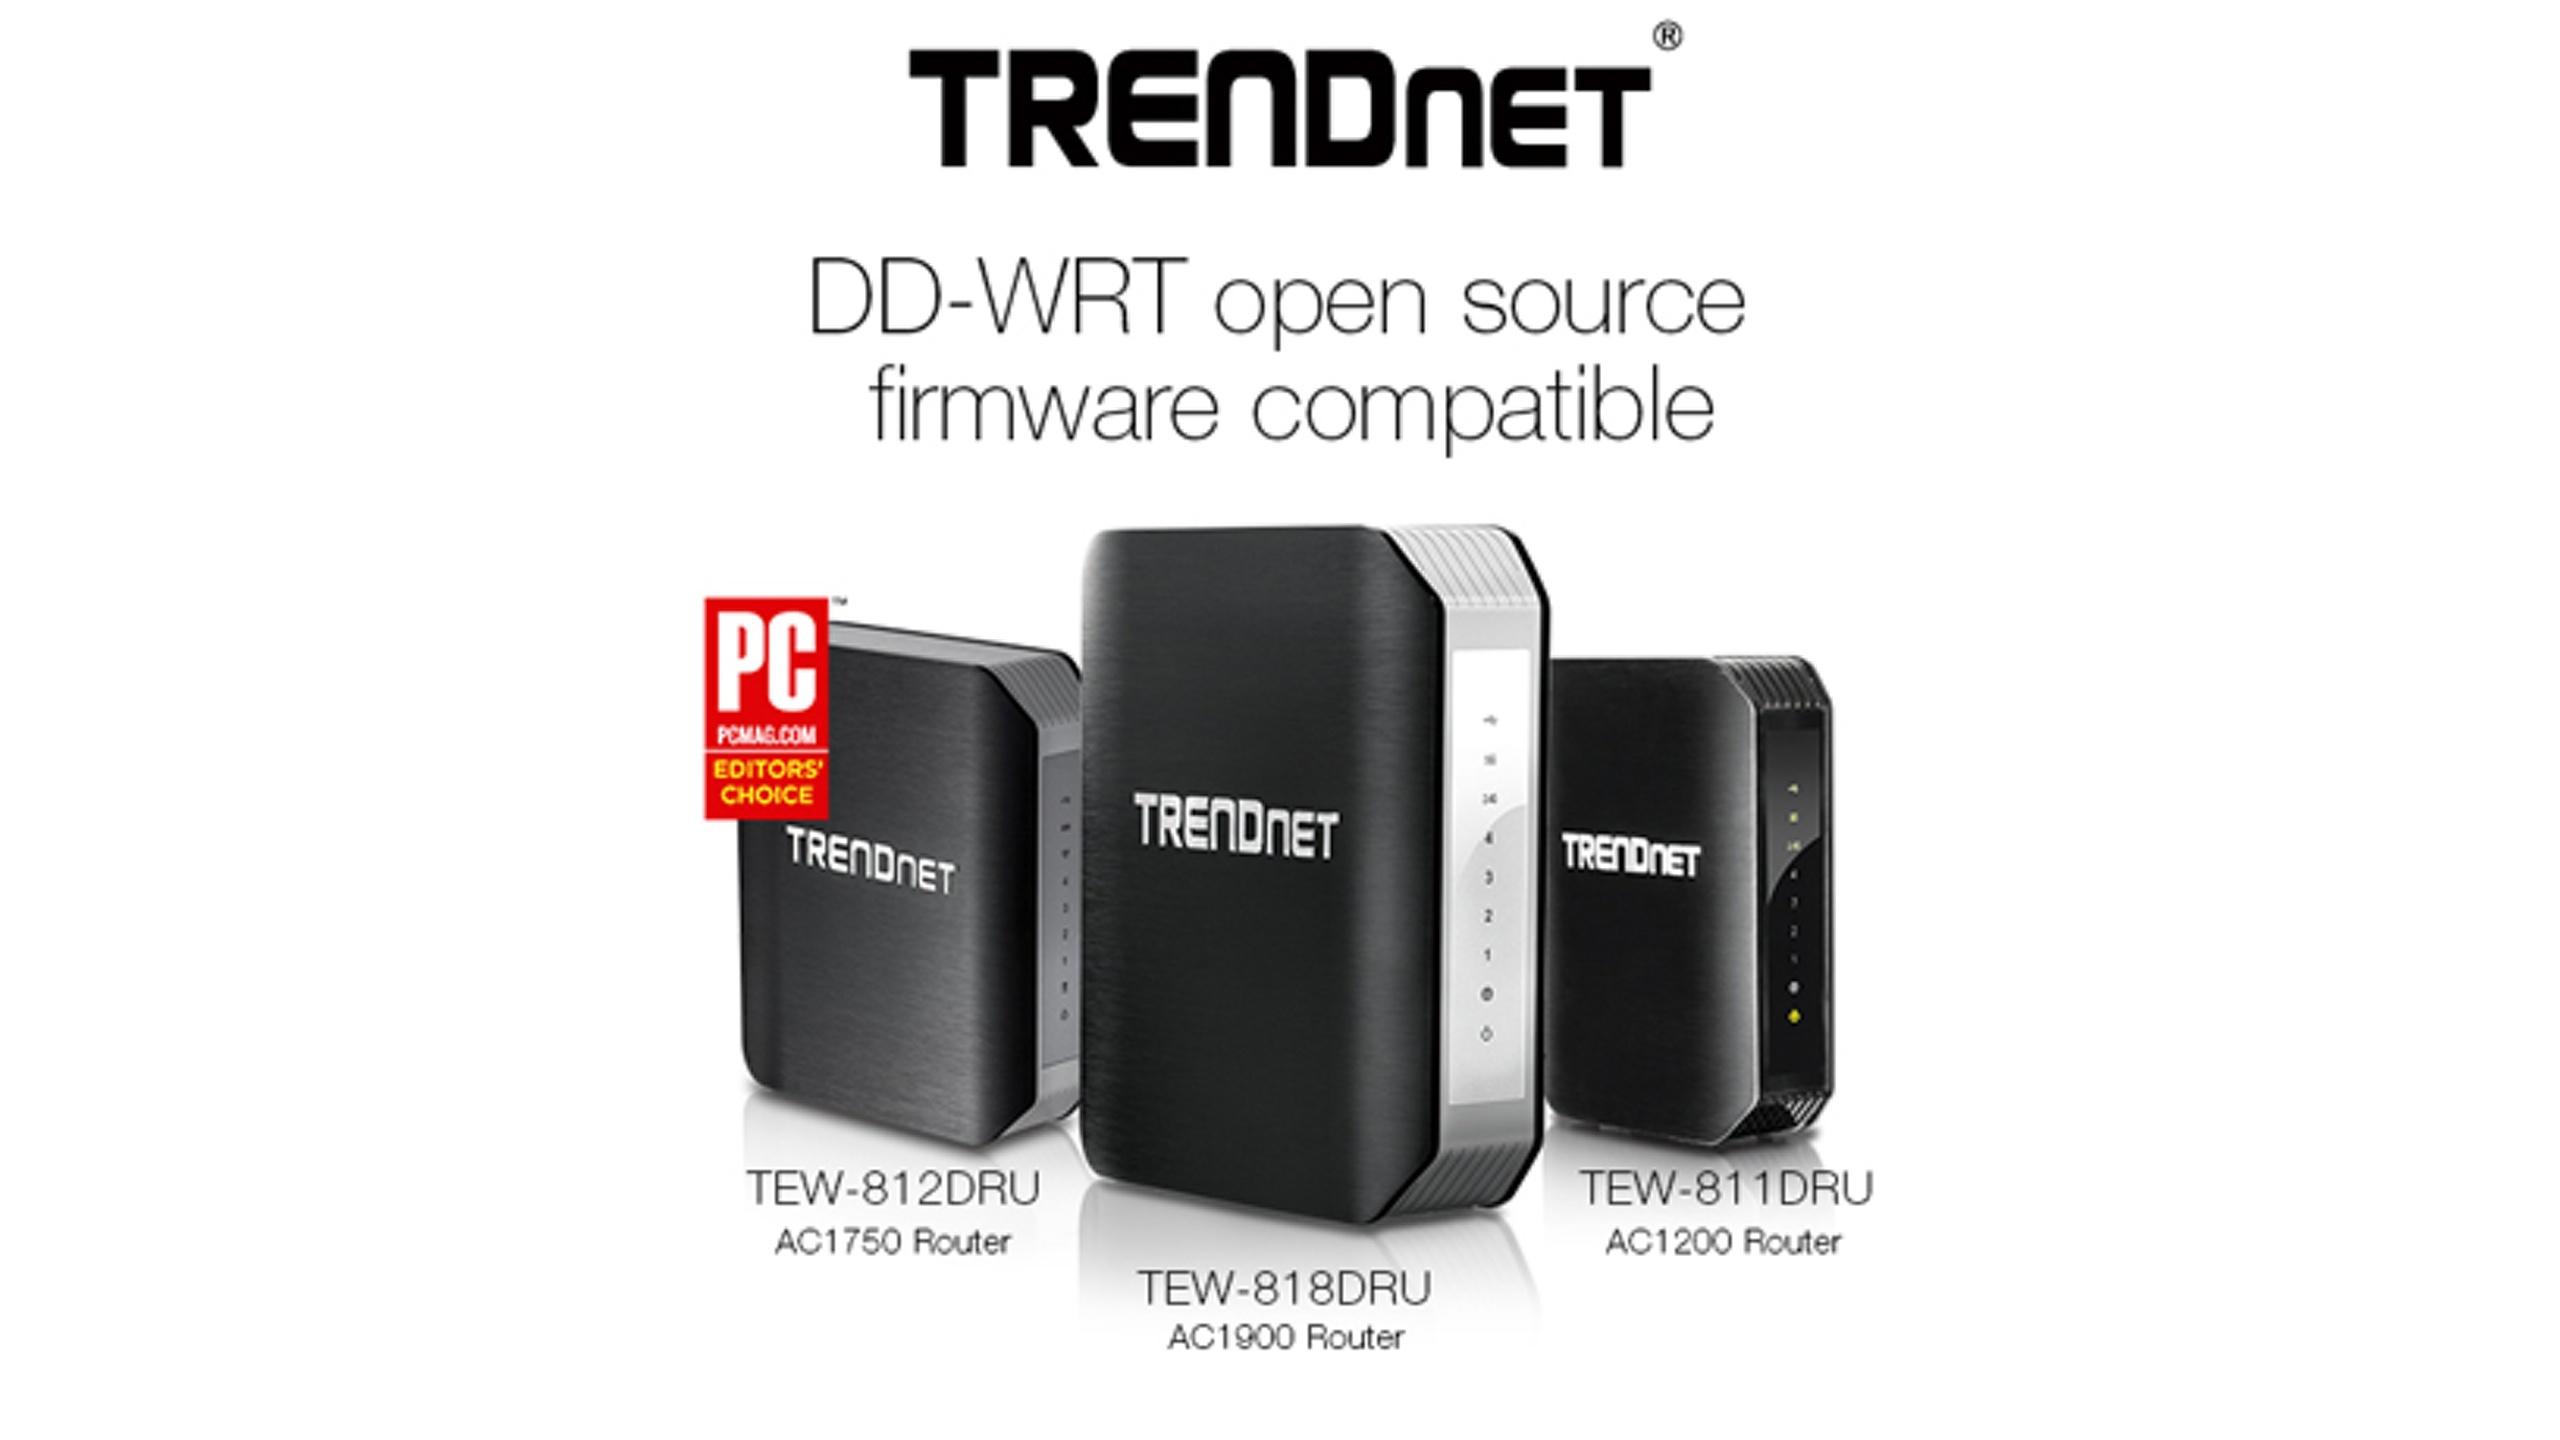 TRENDnet Logo - TRENDnet Makes Open Source DD WRT Firmware Available For Its Routers